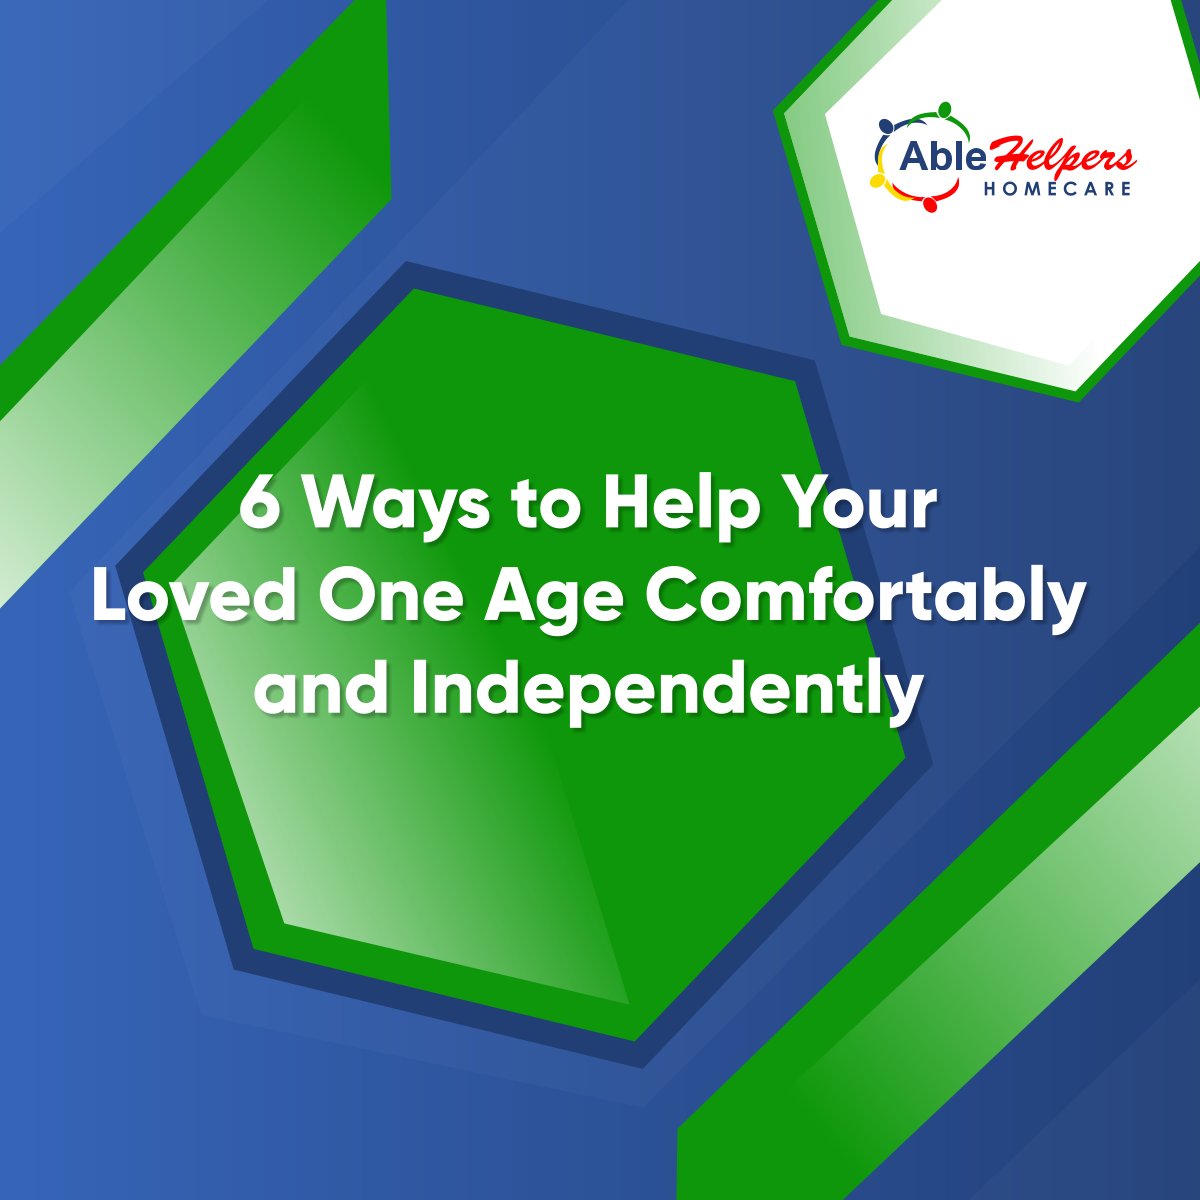 Aging is a natural part of life, and as our loved ones grow older, it becomes crucial to ensure they age comfortably and independently.

Read more: facebook.com/photo.php?fbid…

#LouisvilleKY #Homecare #LovedOne #AgeComfortably #AgeIndependently